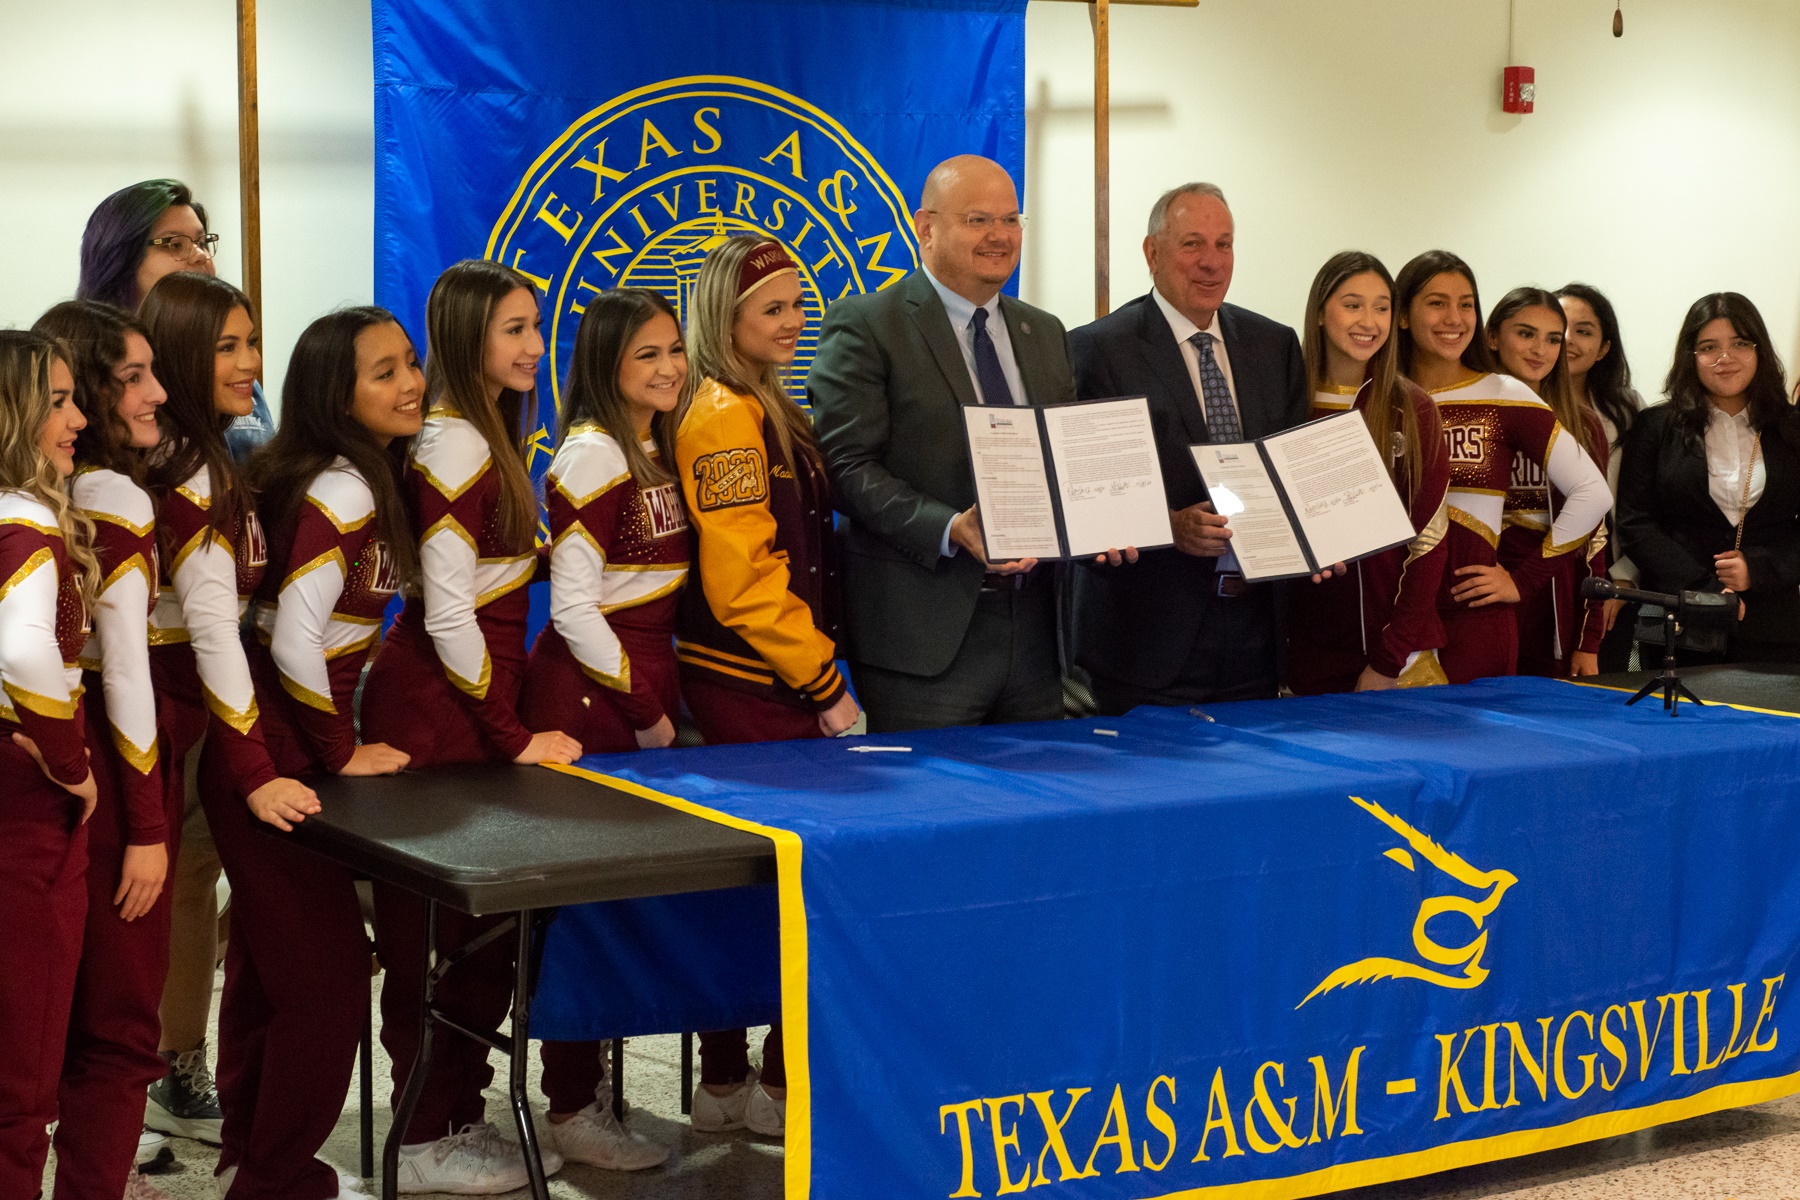 Dr. Robert Vela Jr., president of Texas A&M-Kingsville and Stephen Van Matre, superintendent of the TMISD pose with Tuloso-Midway cheerleaders after signing an MOU concerning dual credit courses.